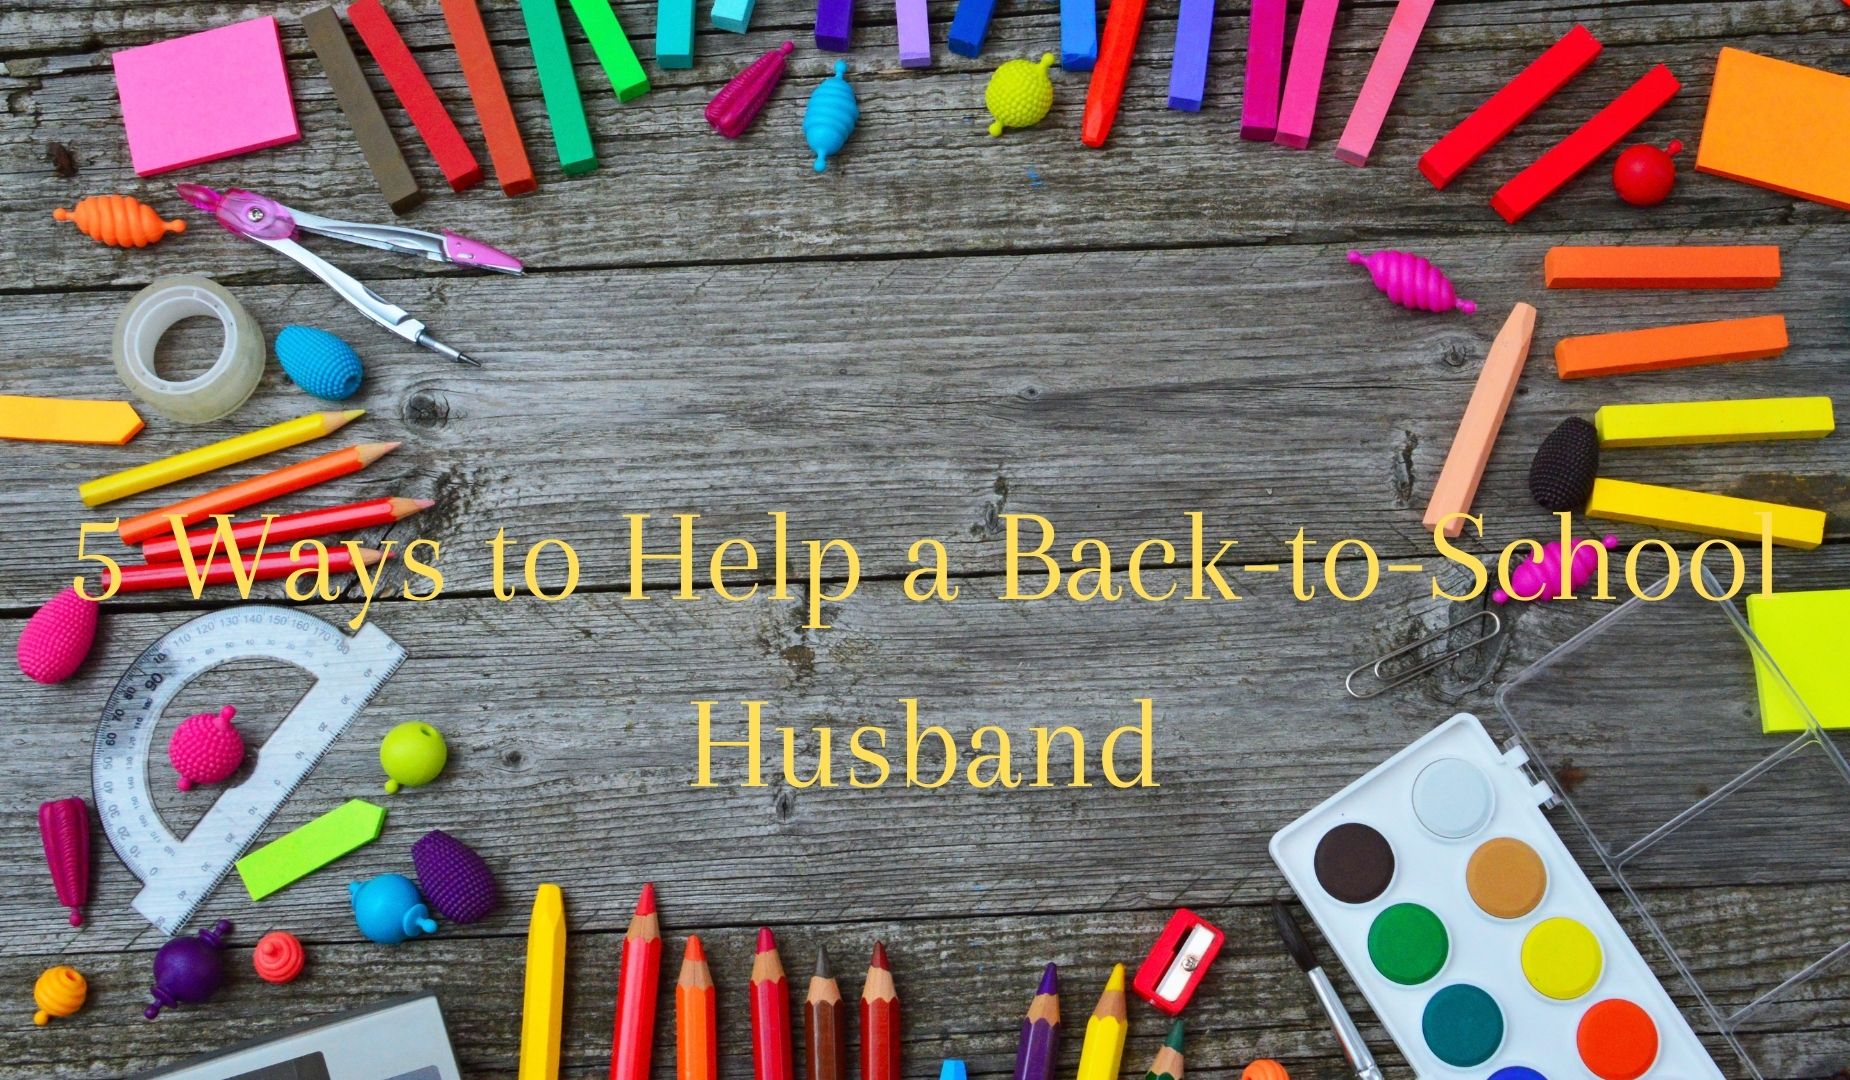 5 Ways to Help a Back-to-School Husband